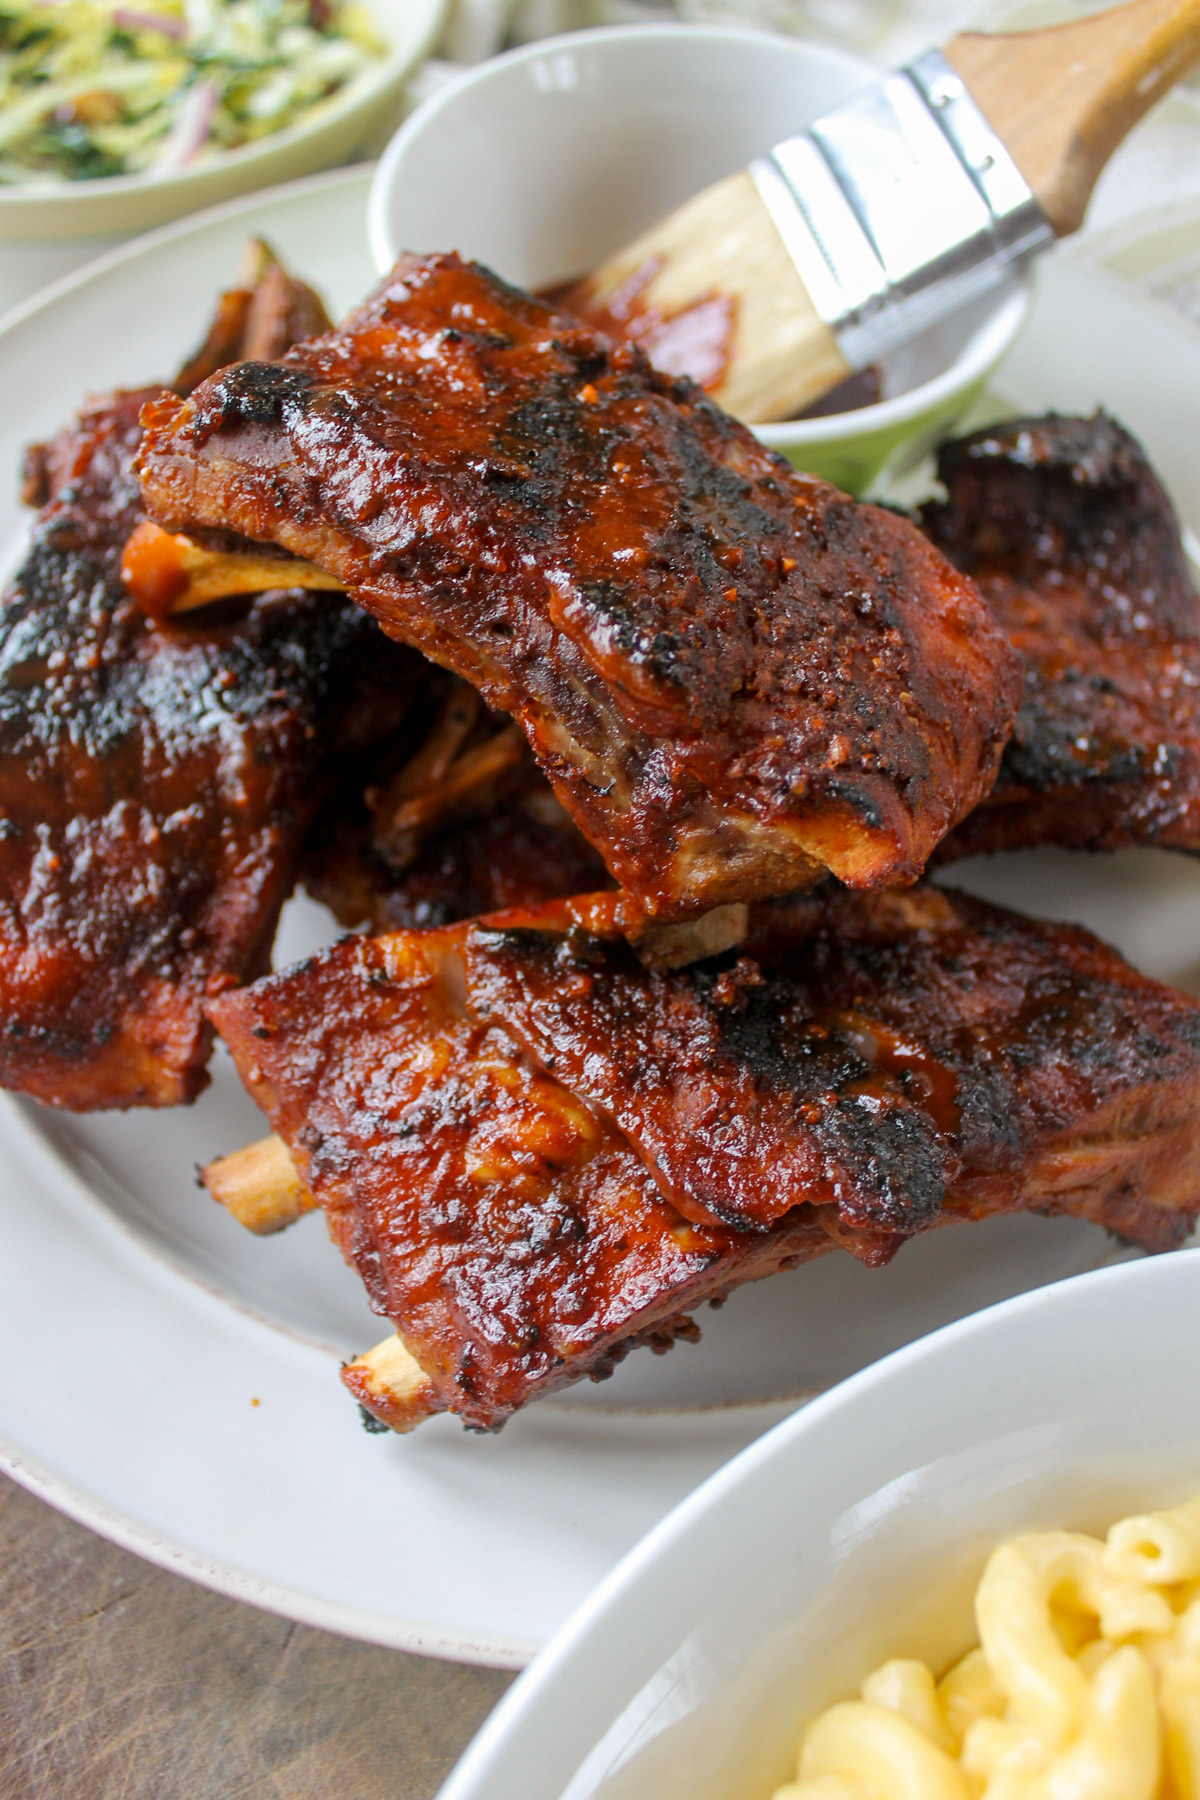 A plate of baby back ribs grilled with barbecue sauce with side dishes around it.